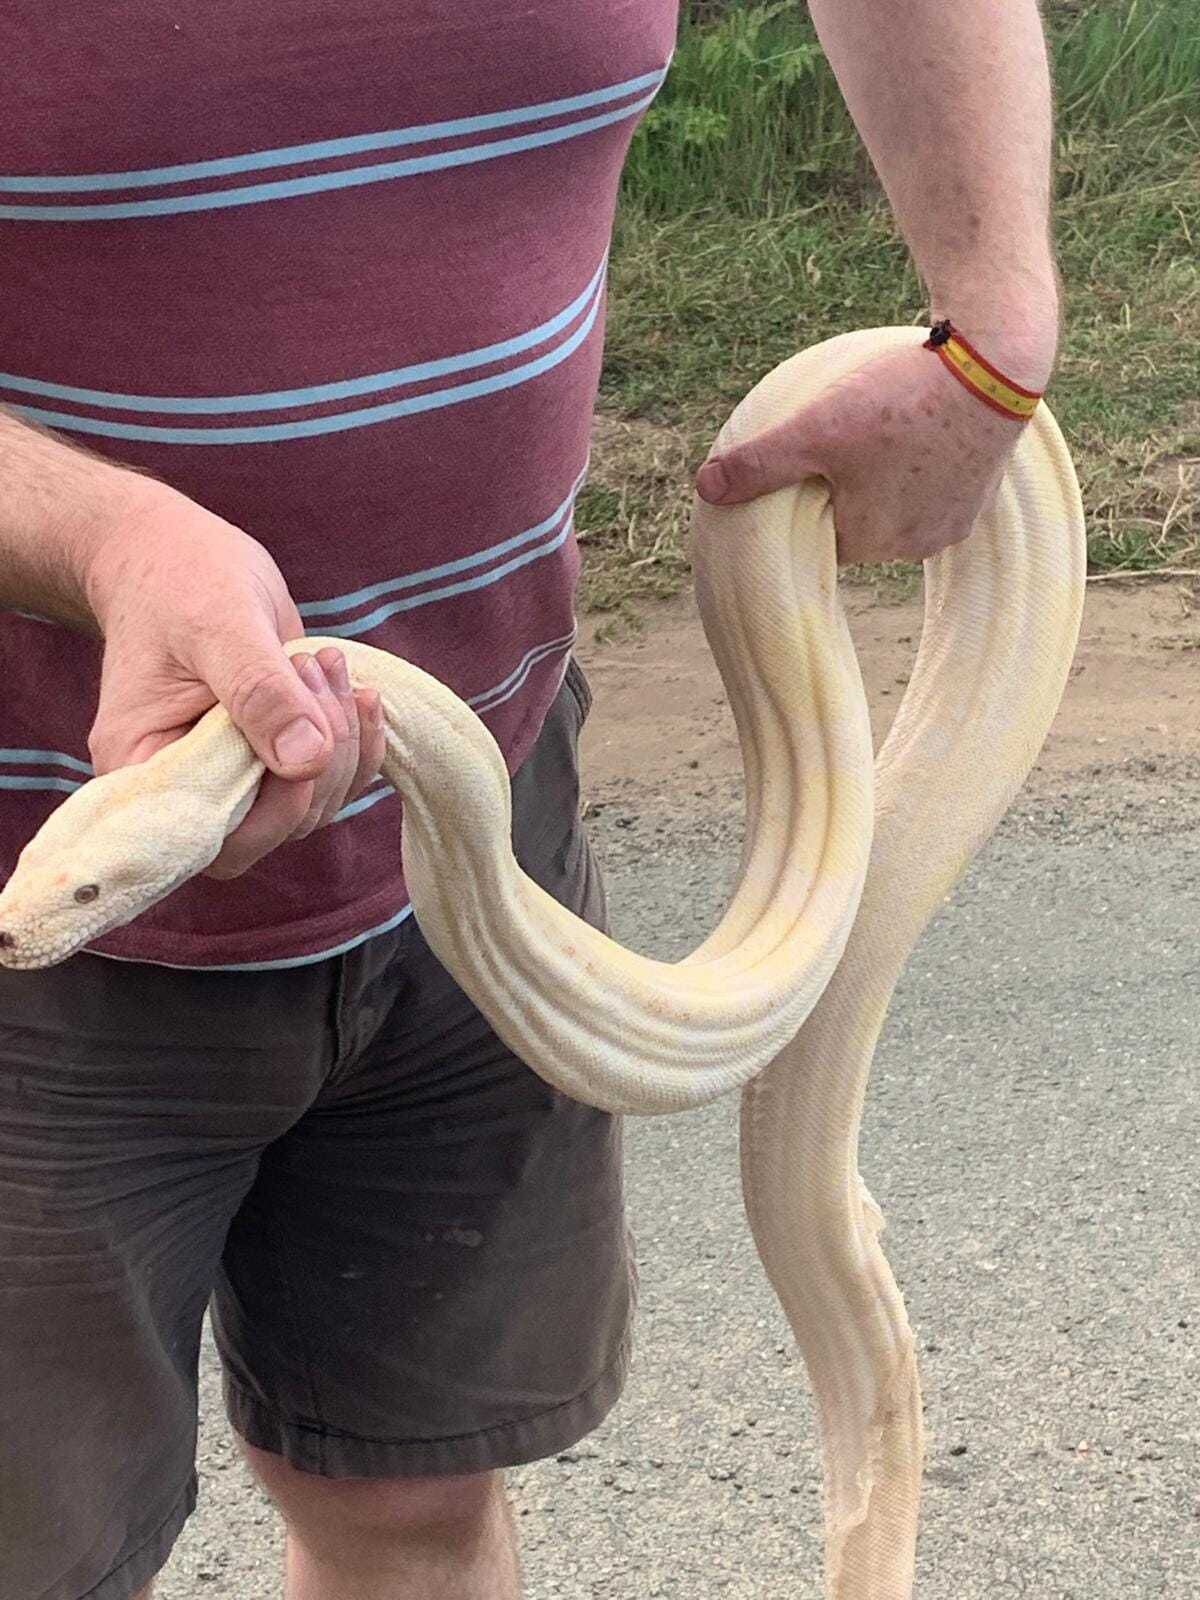 An albino boa constrictor was found in Baschurch on Saturday, August 20